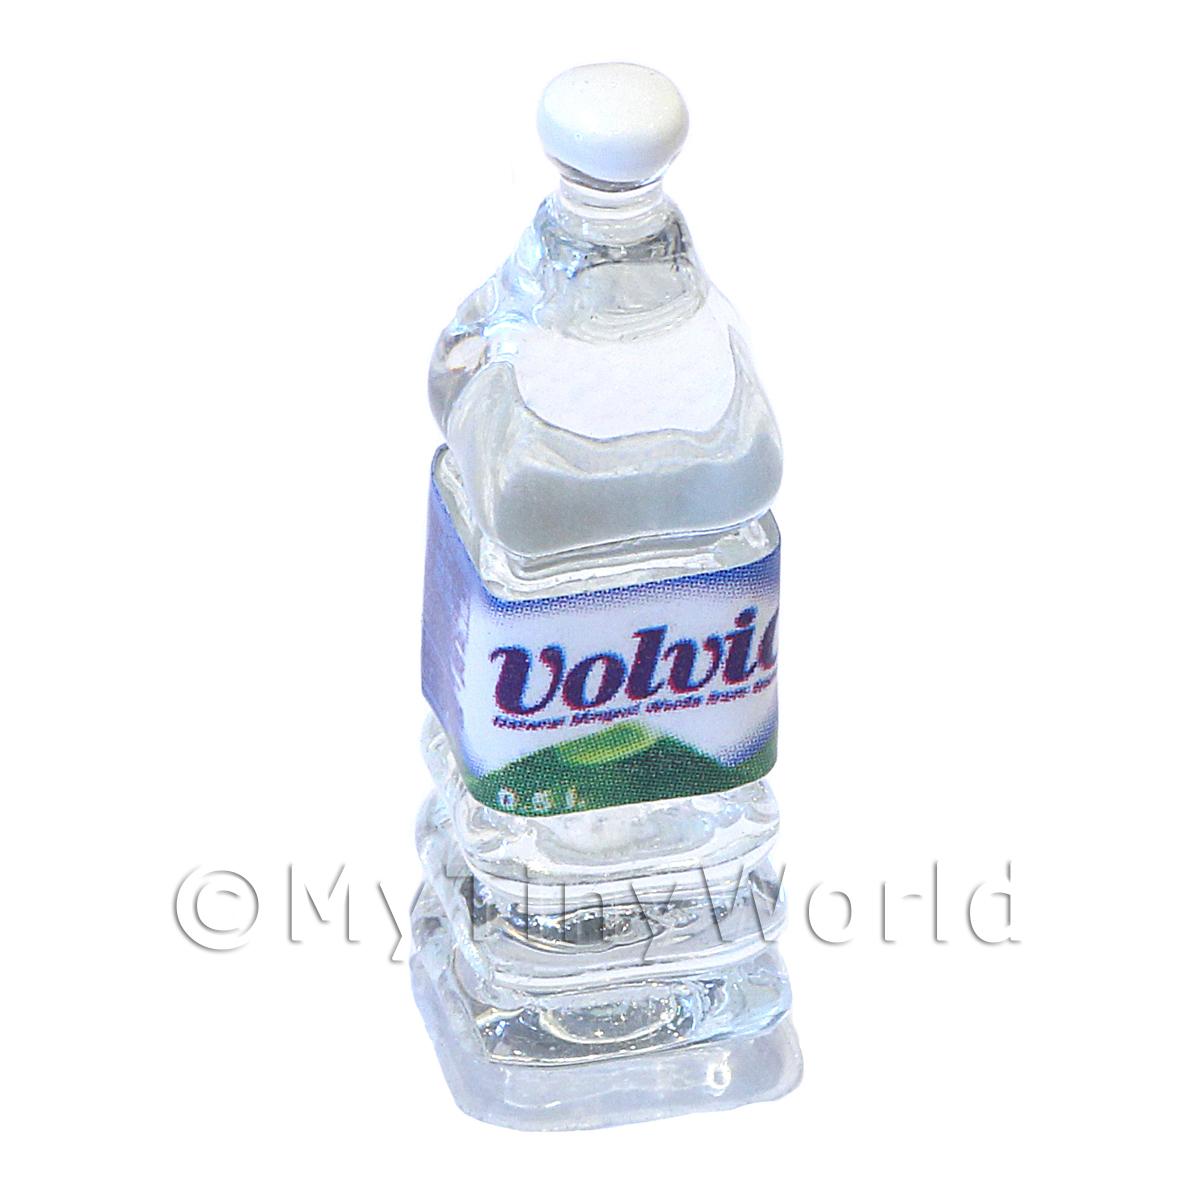 1/12 Scale Dolls House Miniatures  | Dolls House Miniature Large Volvic Brand Square Water Bottle